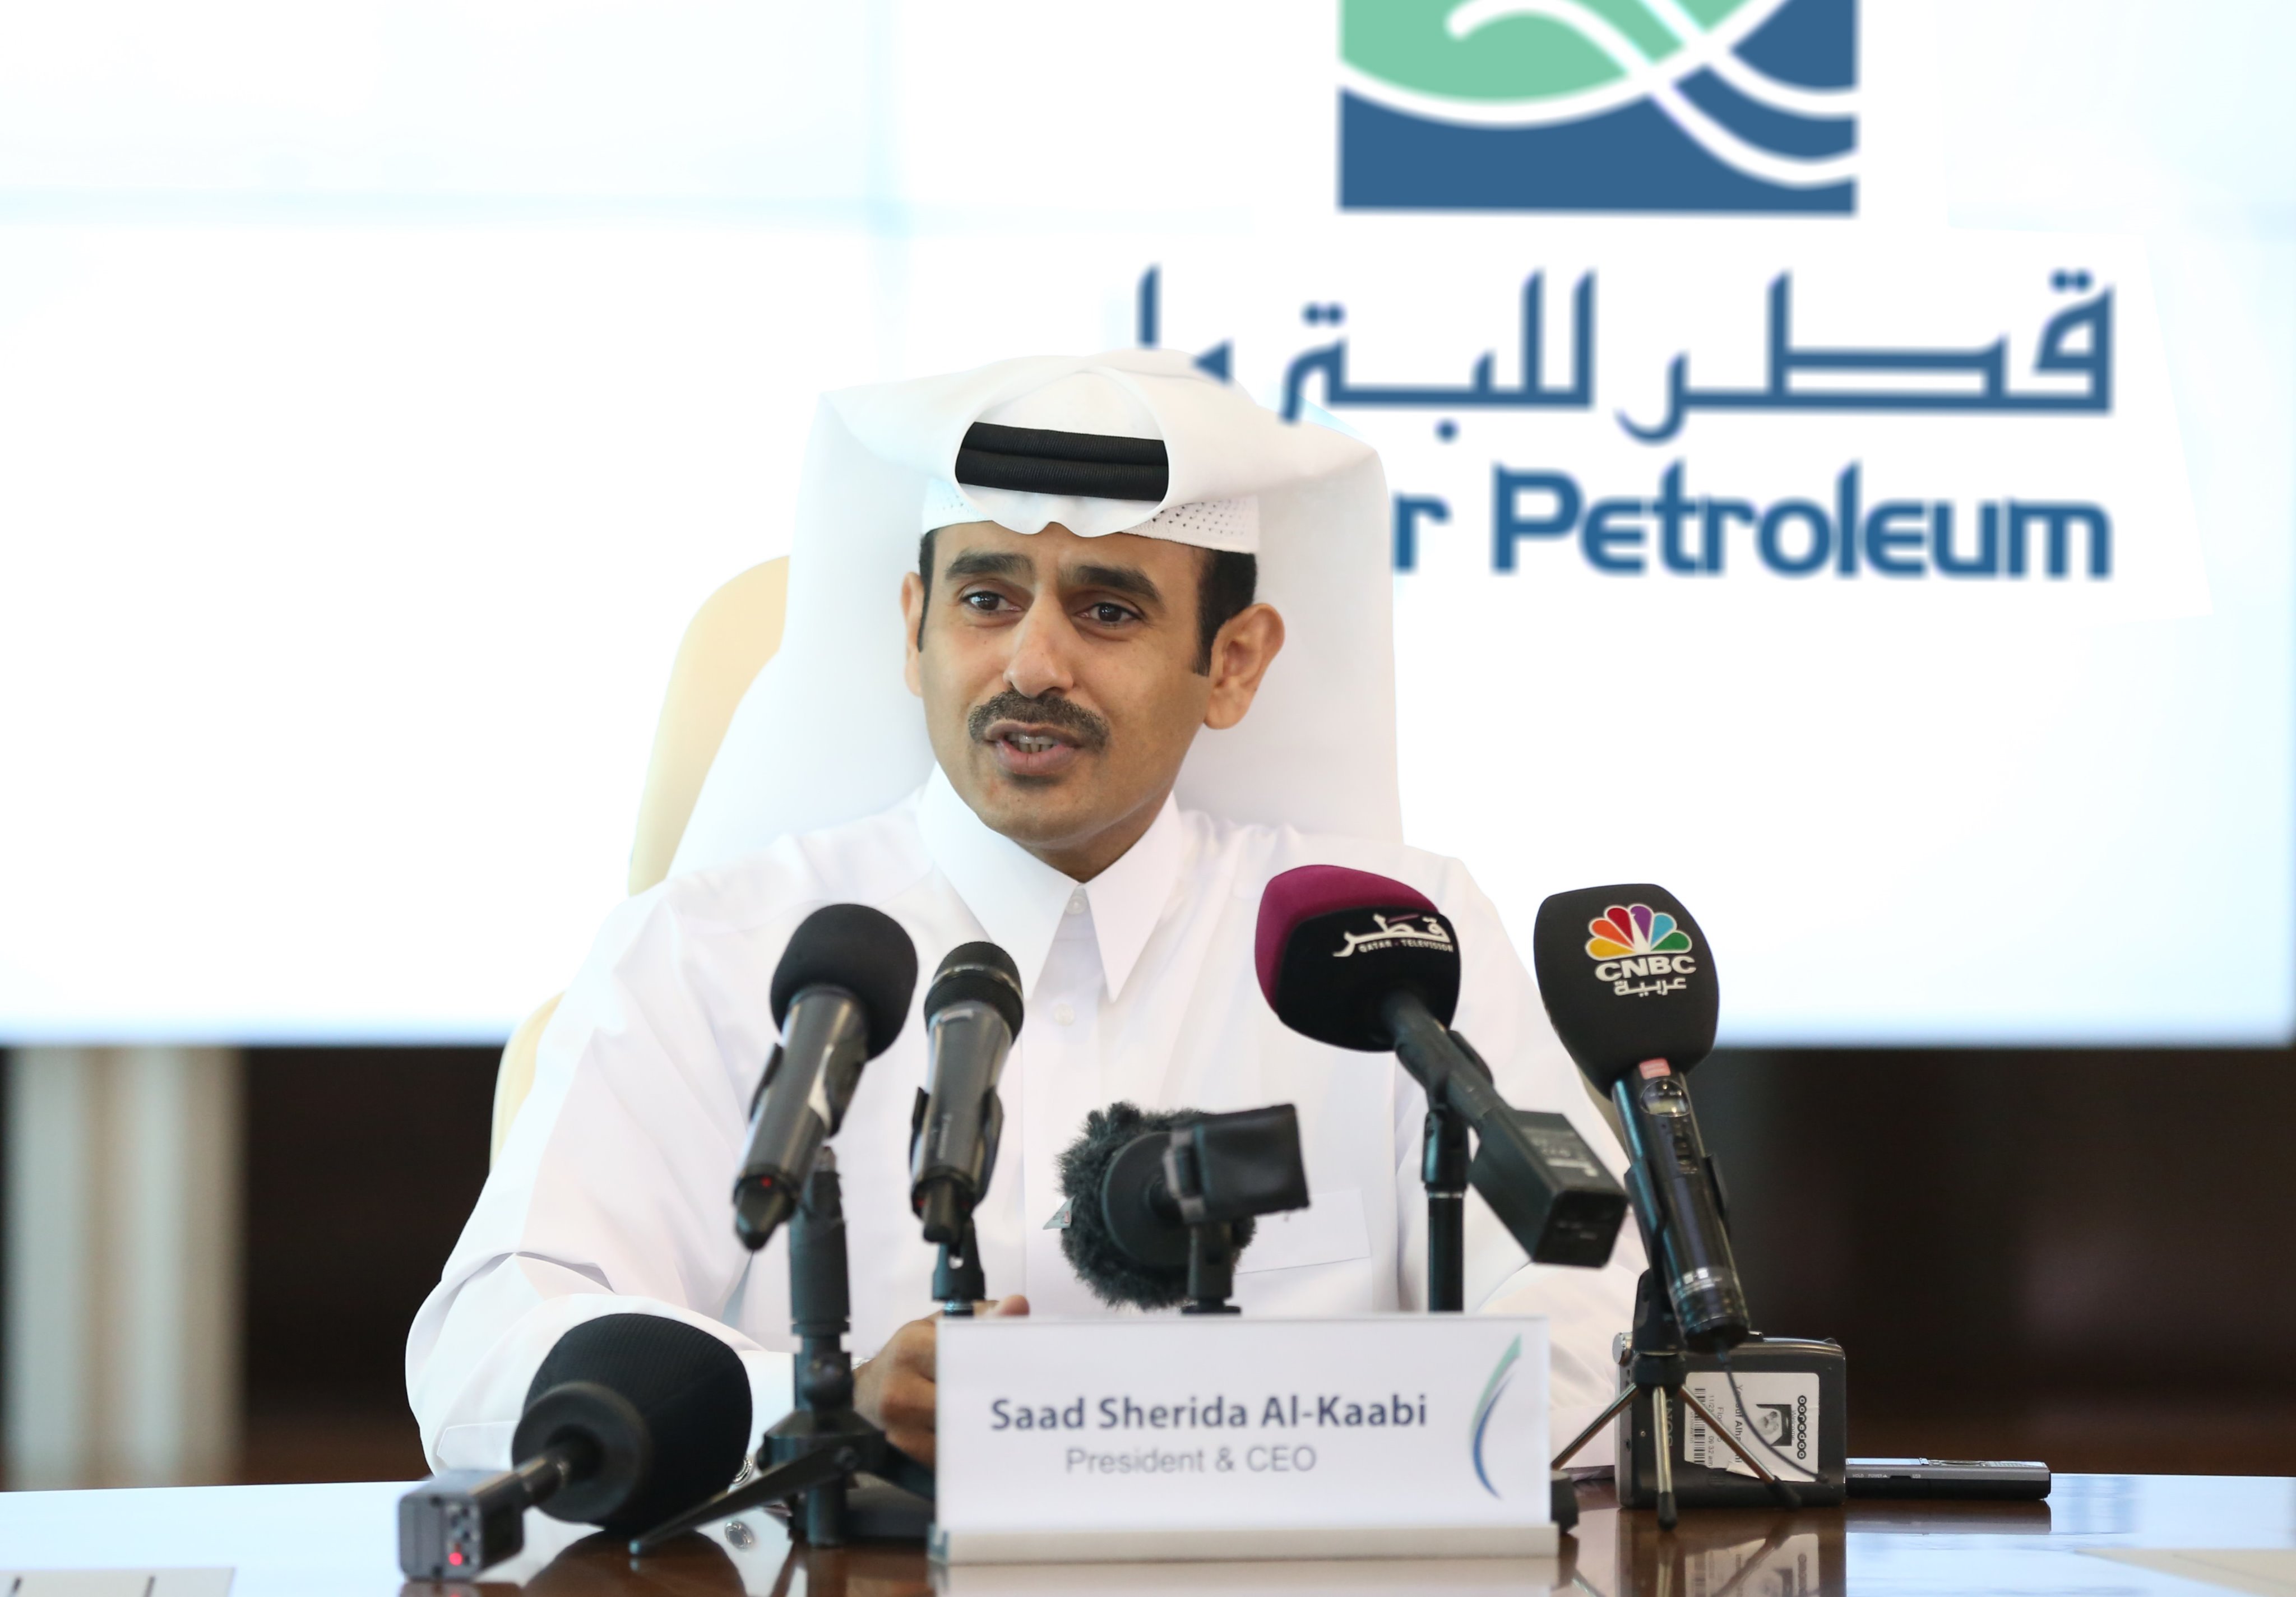 BREAKING: Qatar Petroleum issues 100 LNG carriers build invite